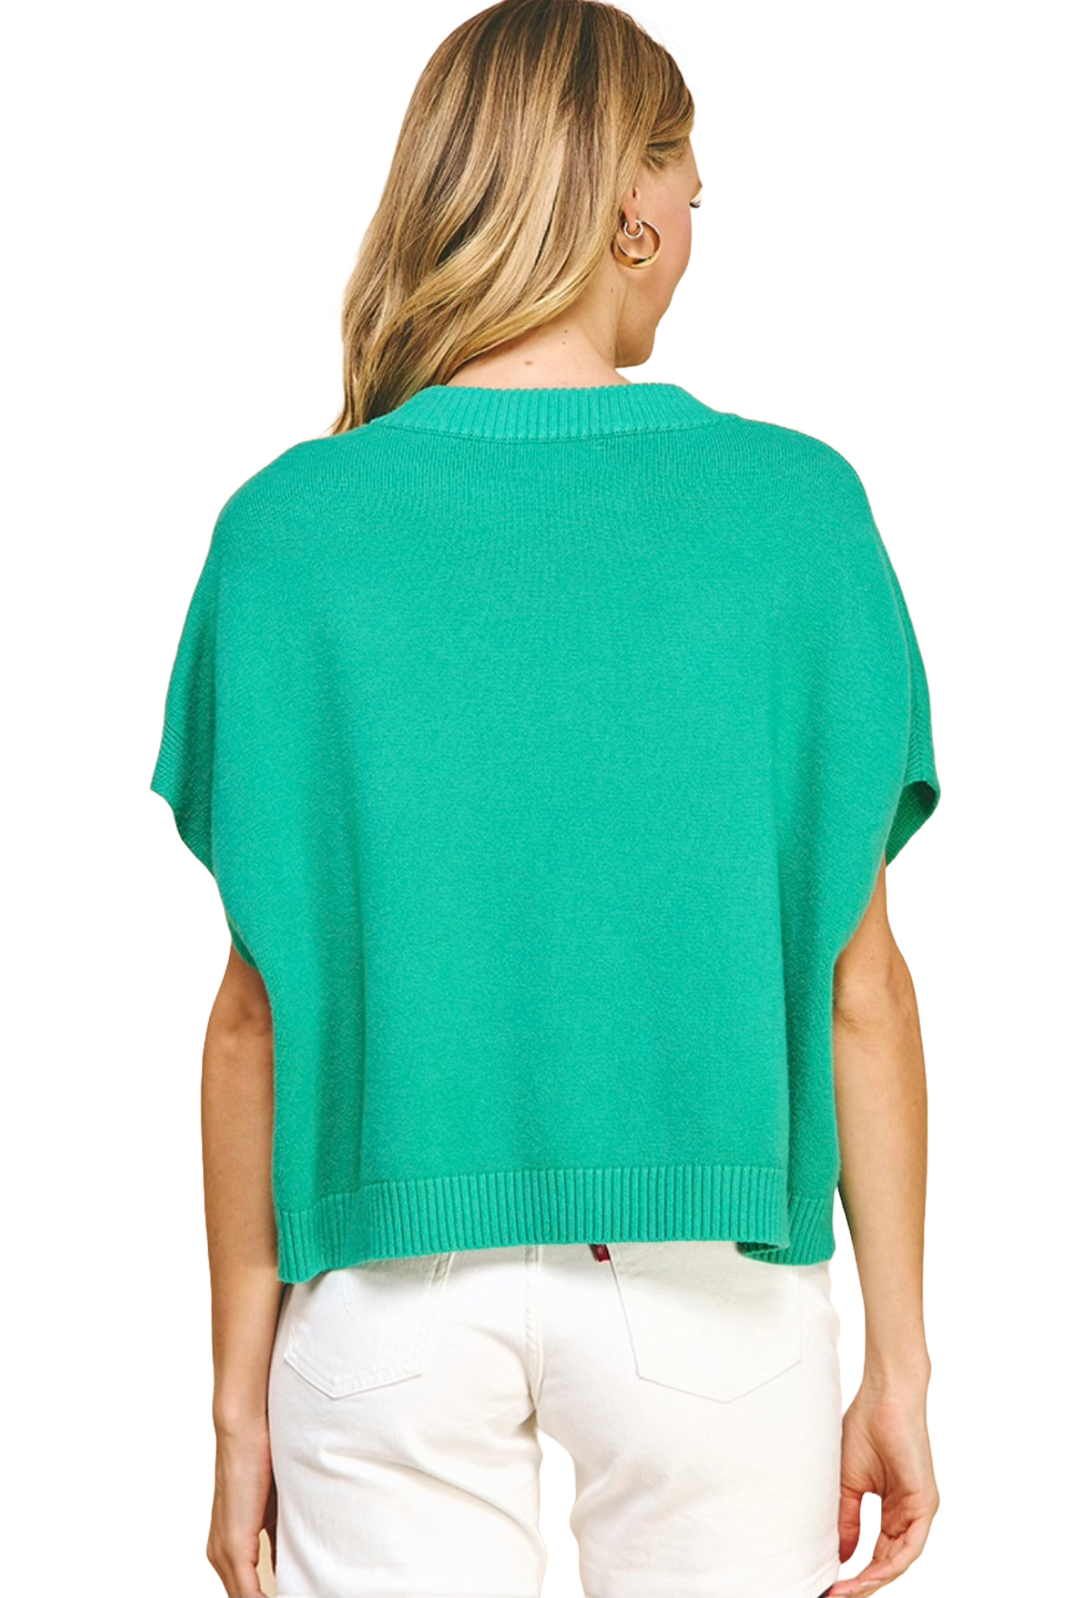 The Candace Top- Green